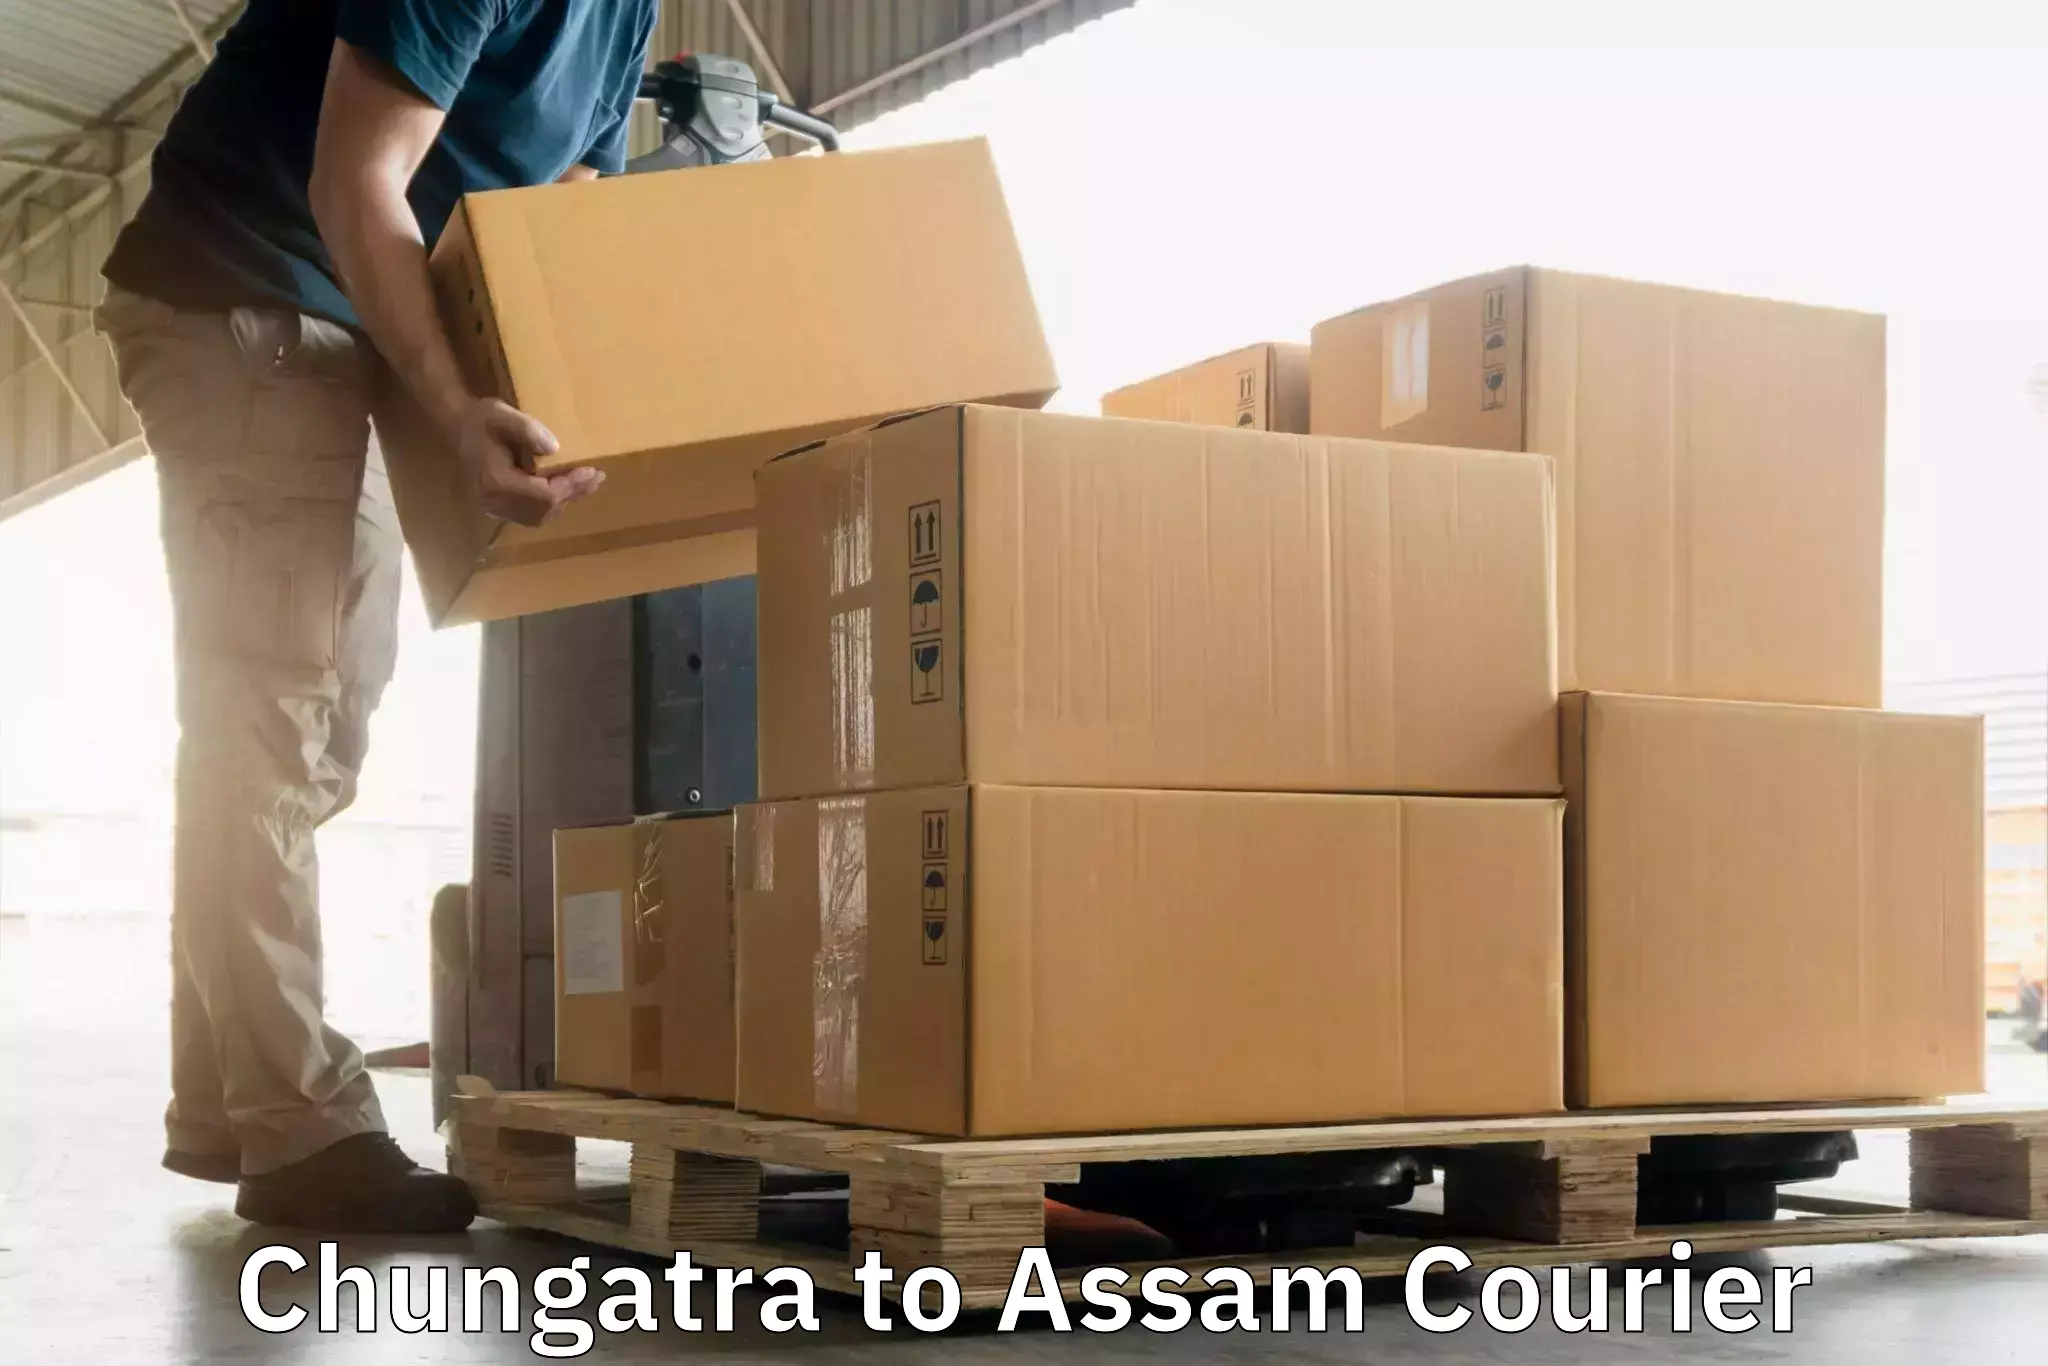 Small parcel delivery in Chungatra to Assam